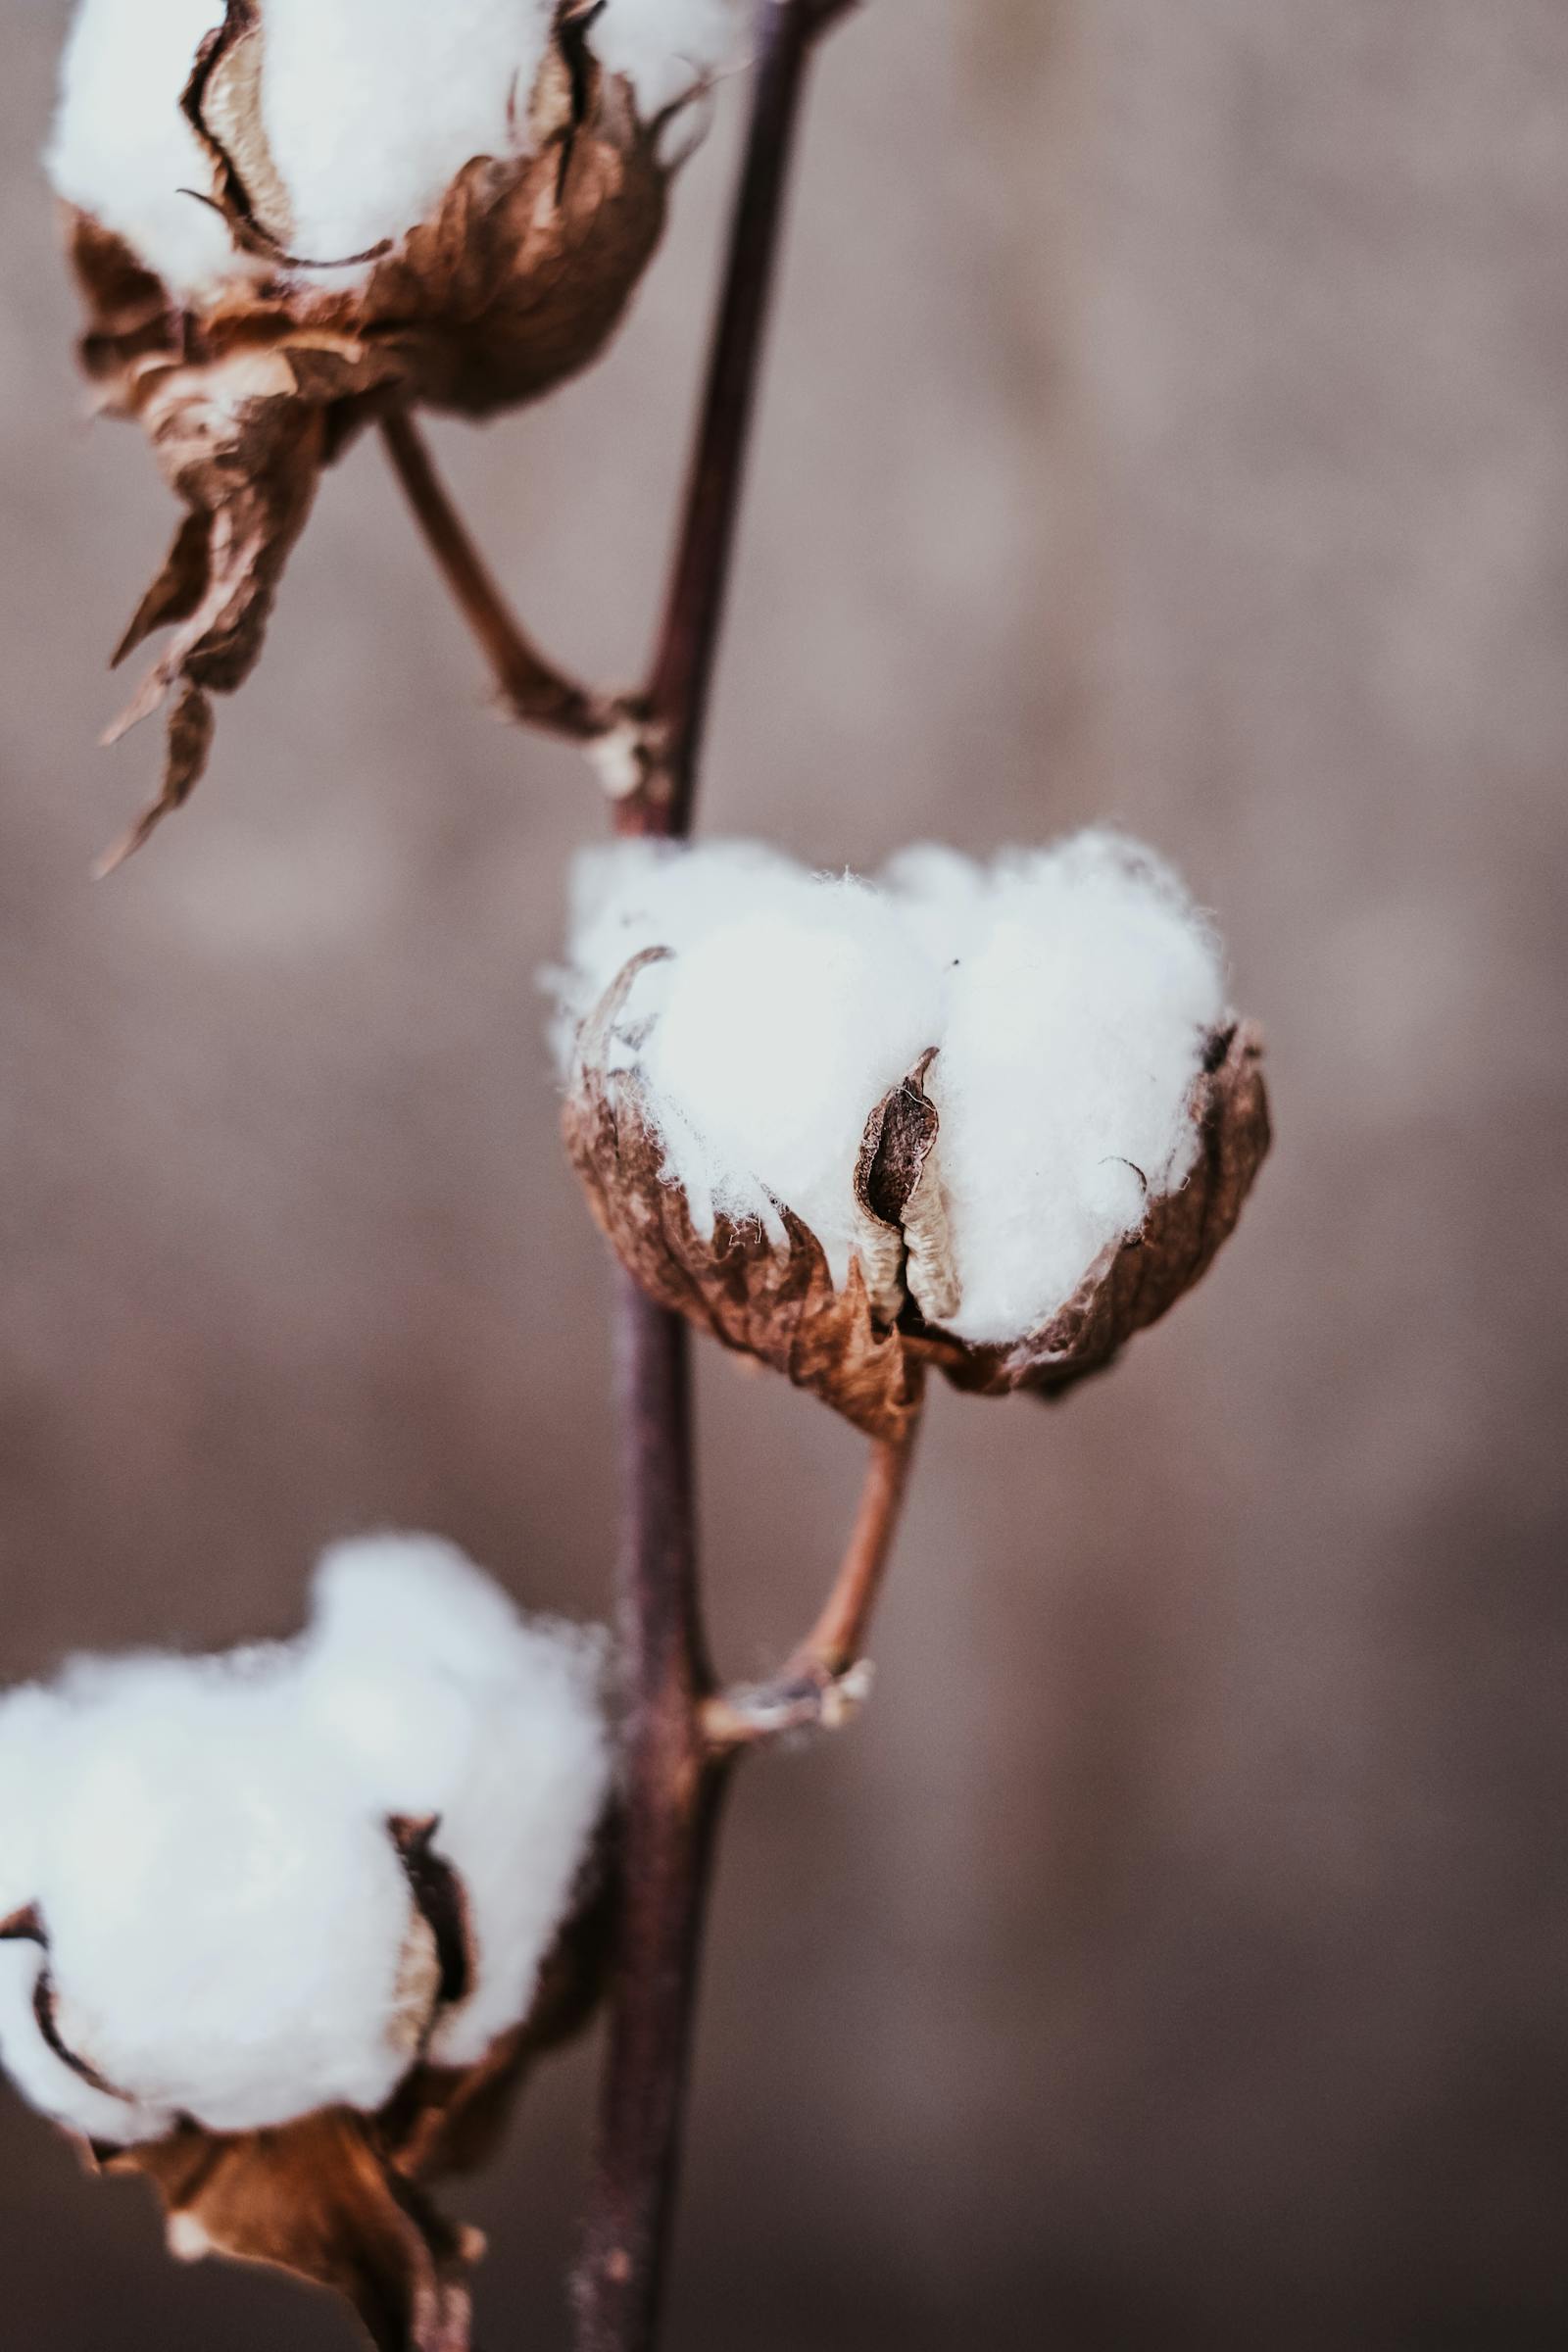 Sustainable Cotton is the New 'Better' Organic Cotton